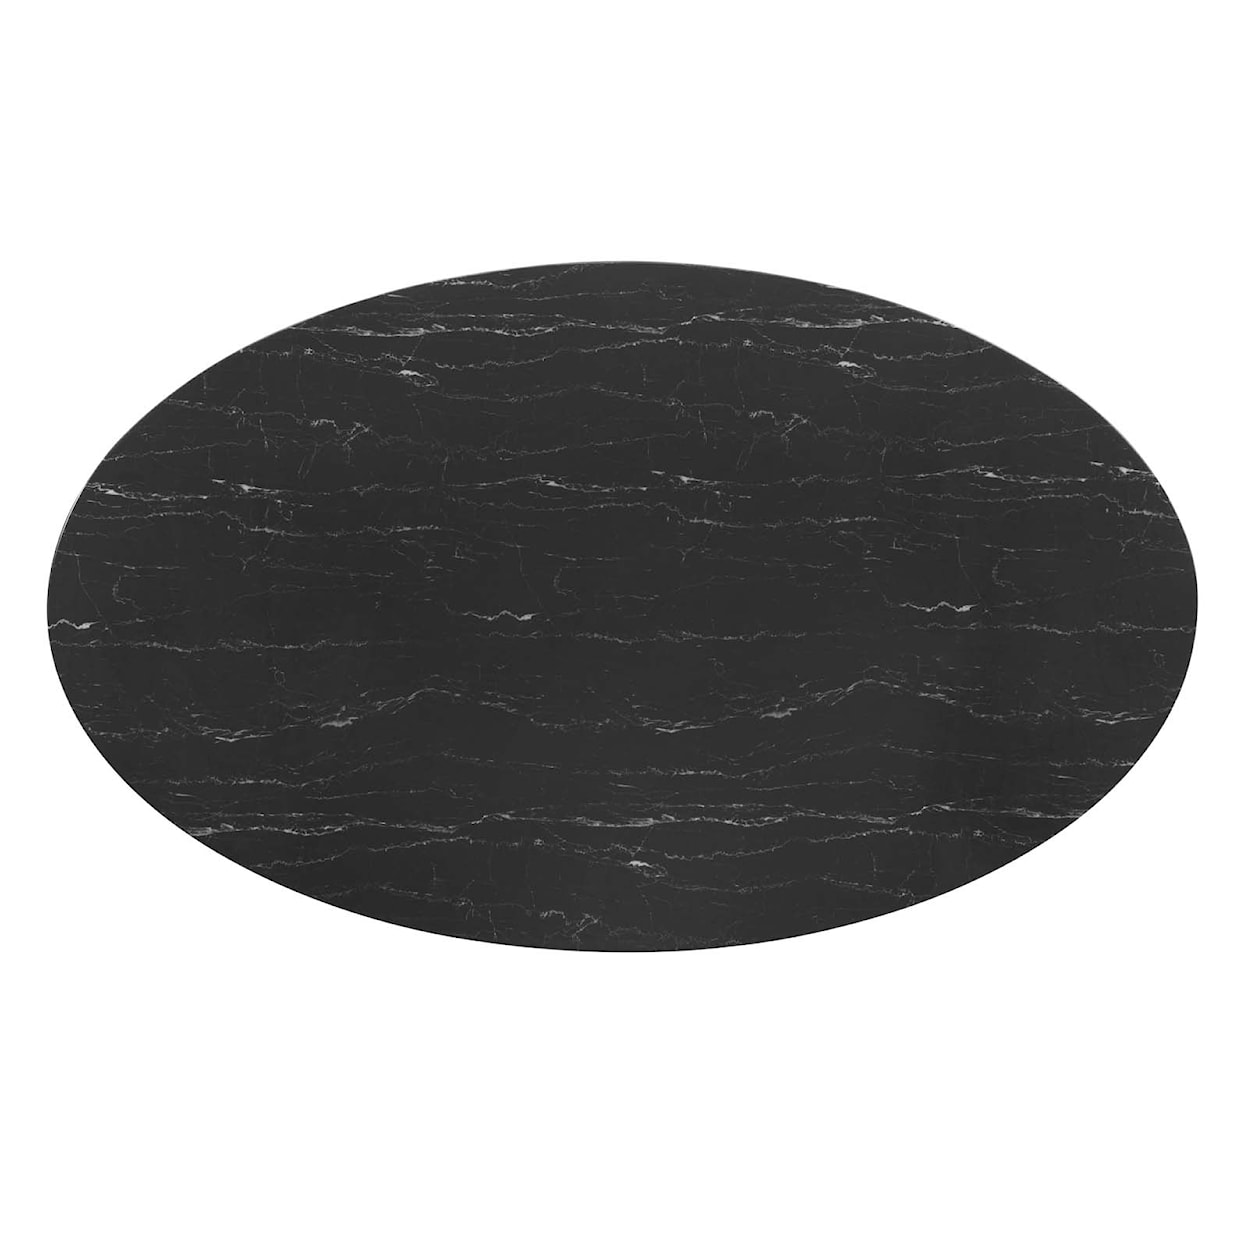 Modway Lippa 78" Oval Marble Dining Table